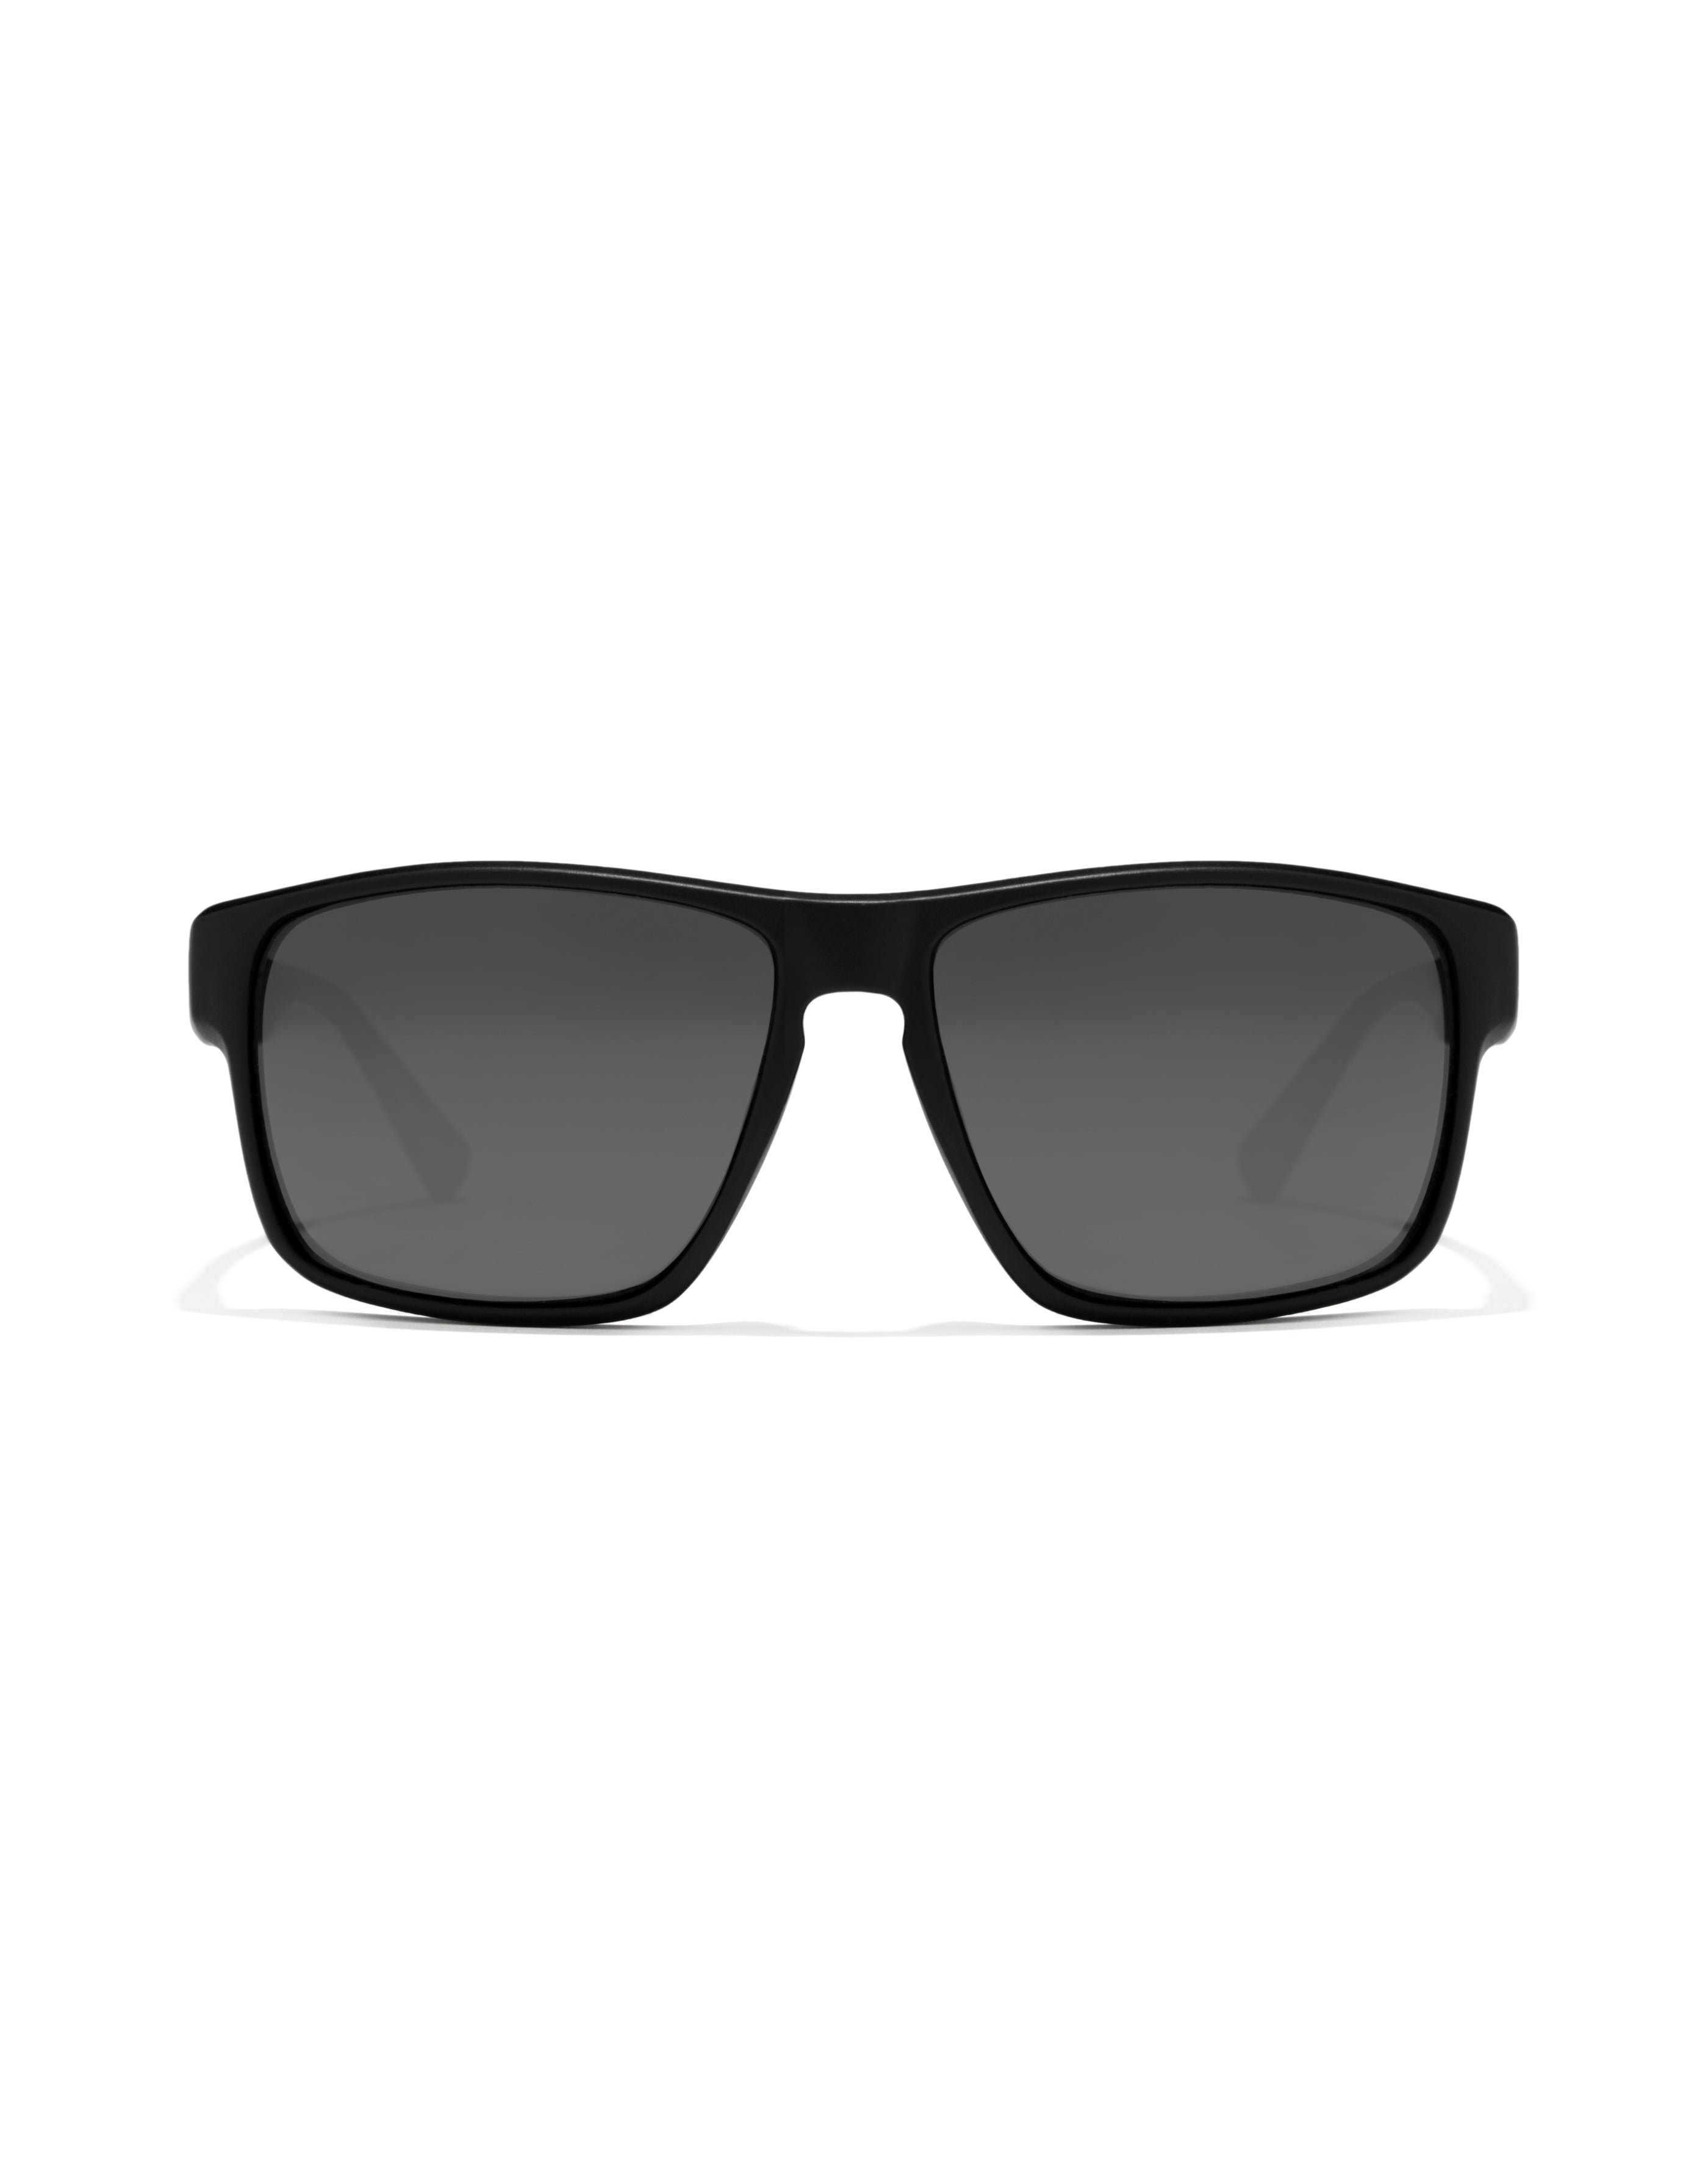 HAWKERS - FASTER Black Dark For Men and Women UV400